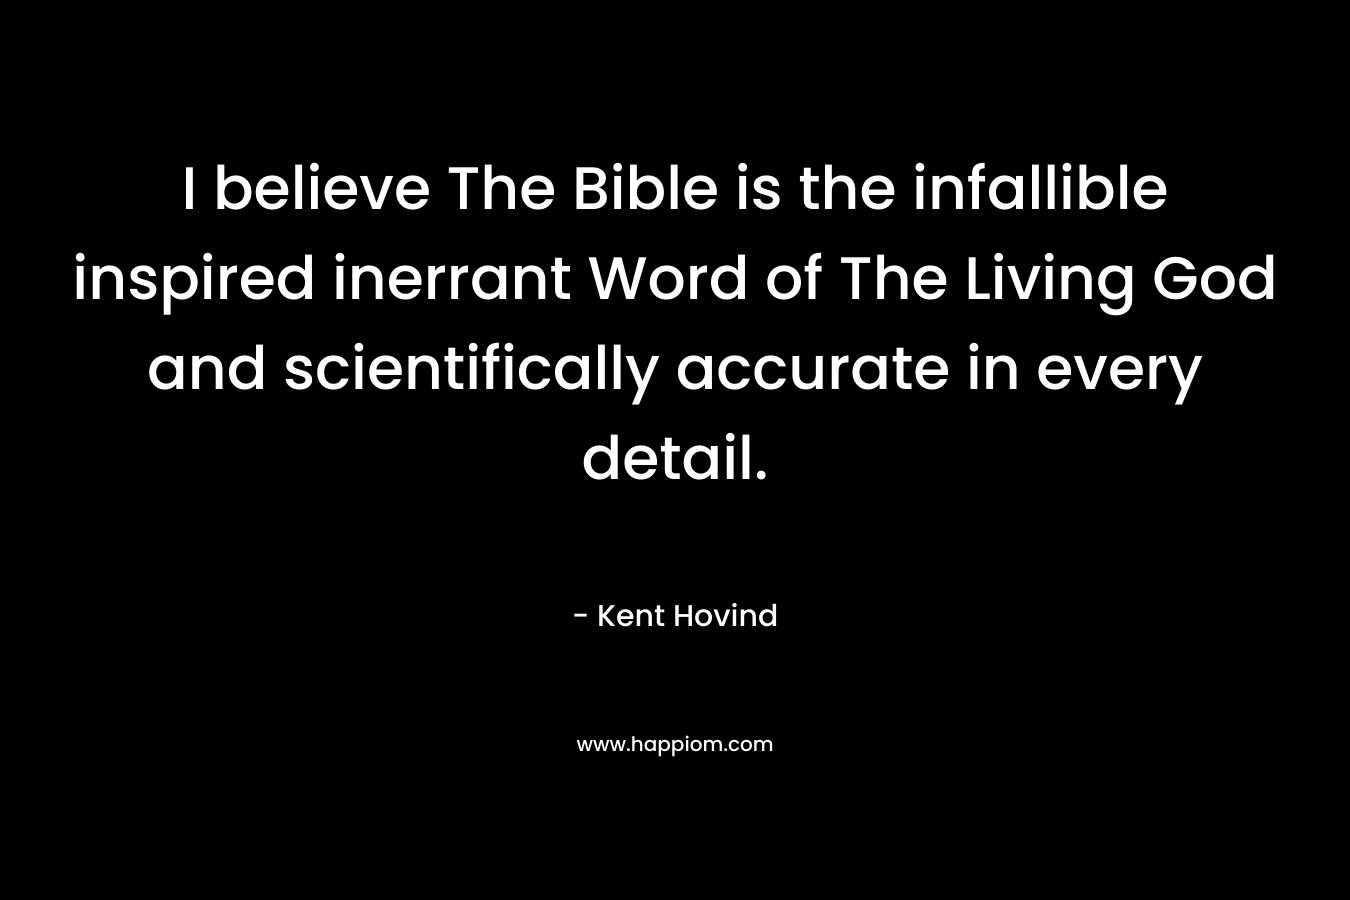 I believe The Bible is the infallible inspired inerrant Word of The Living God and scientifically accurate in every detail.